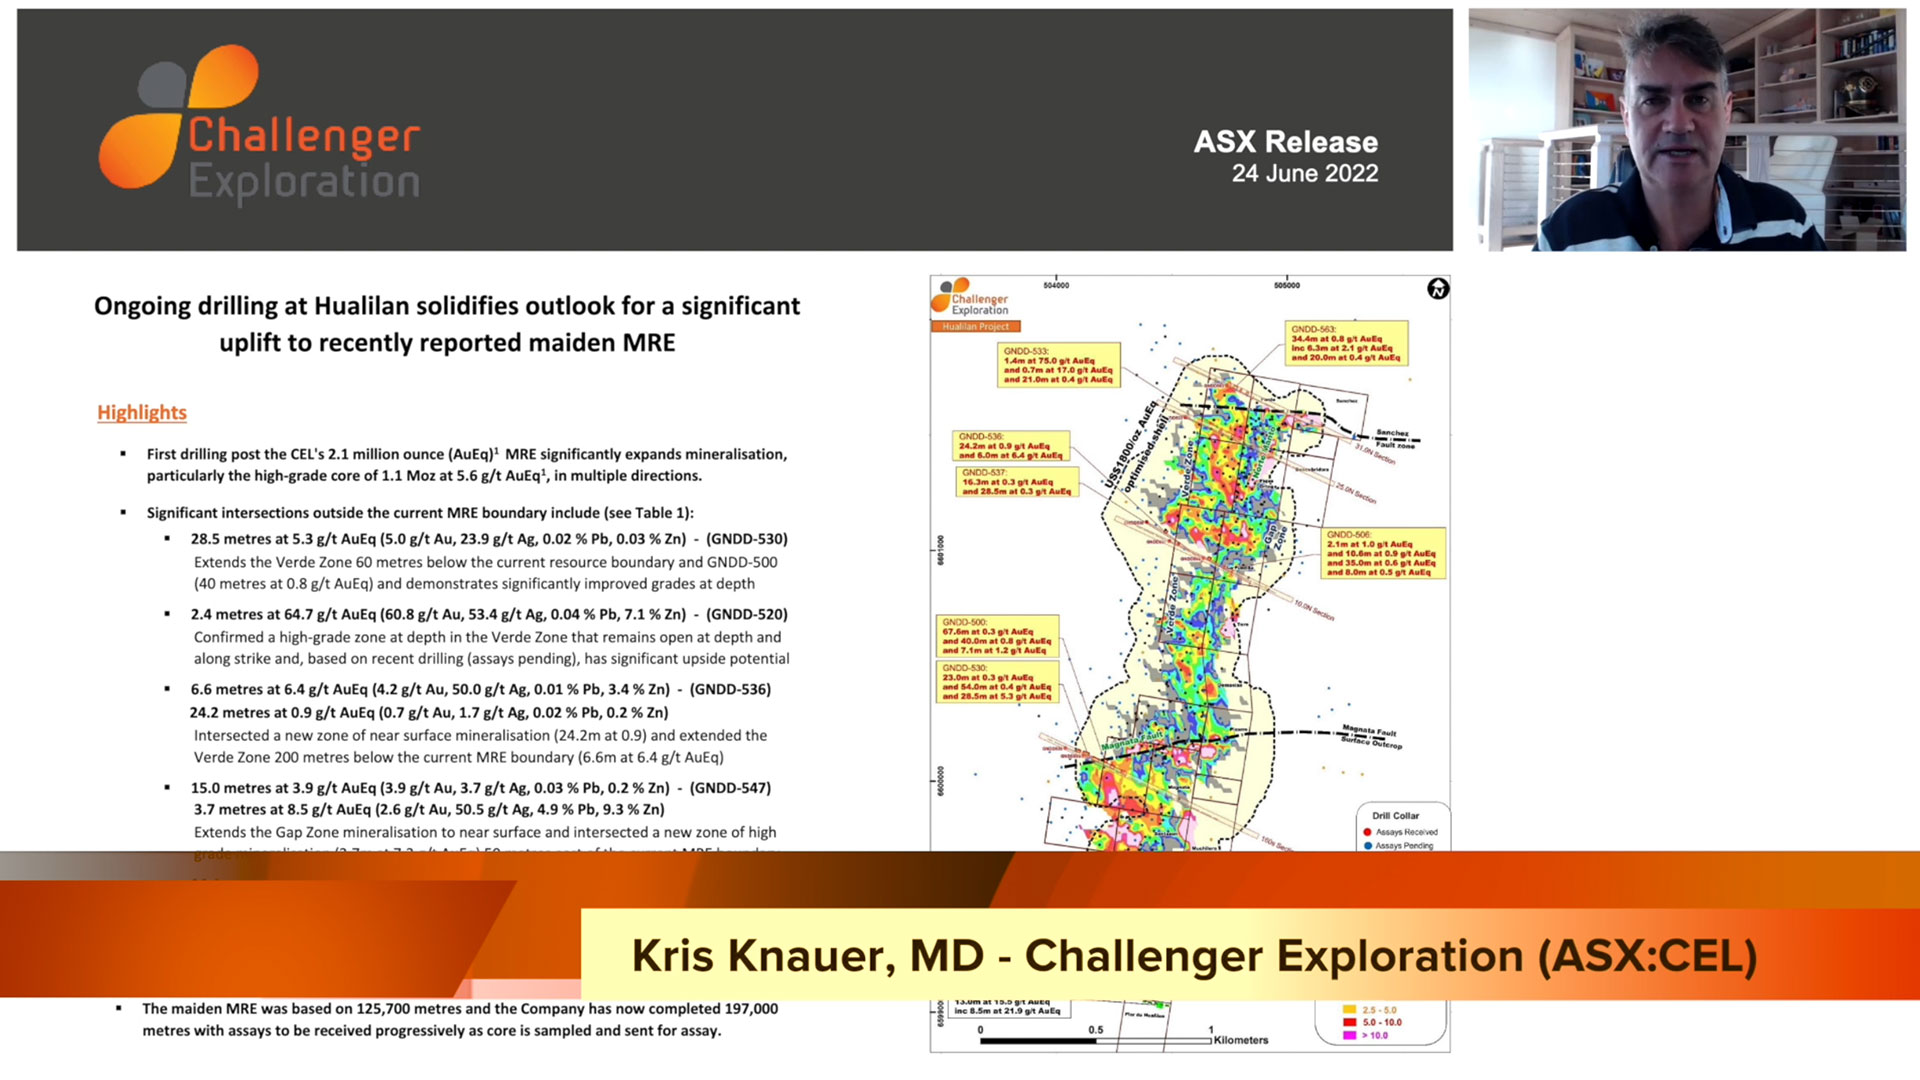 Kris Knauer outlines a positive outlook for the Hualilan MRE following significant intersections outside the current Resource